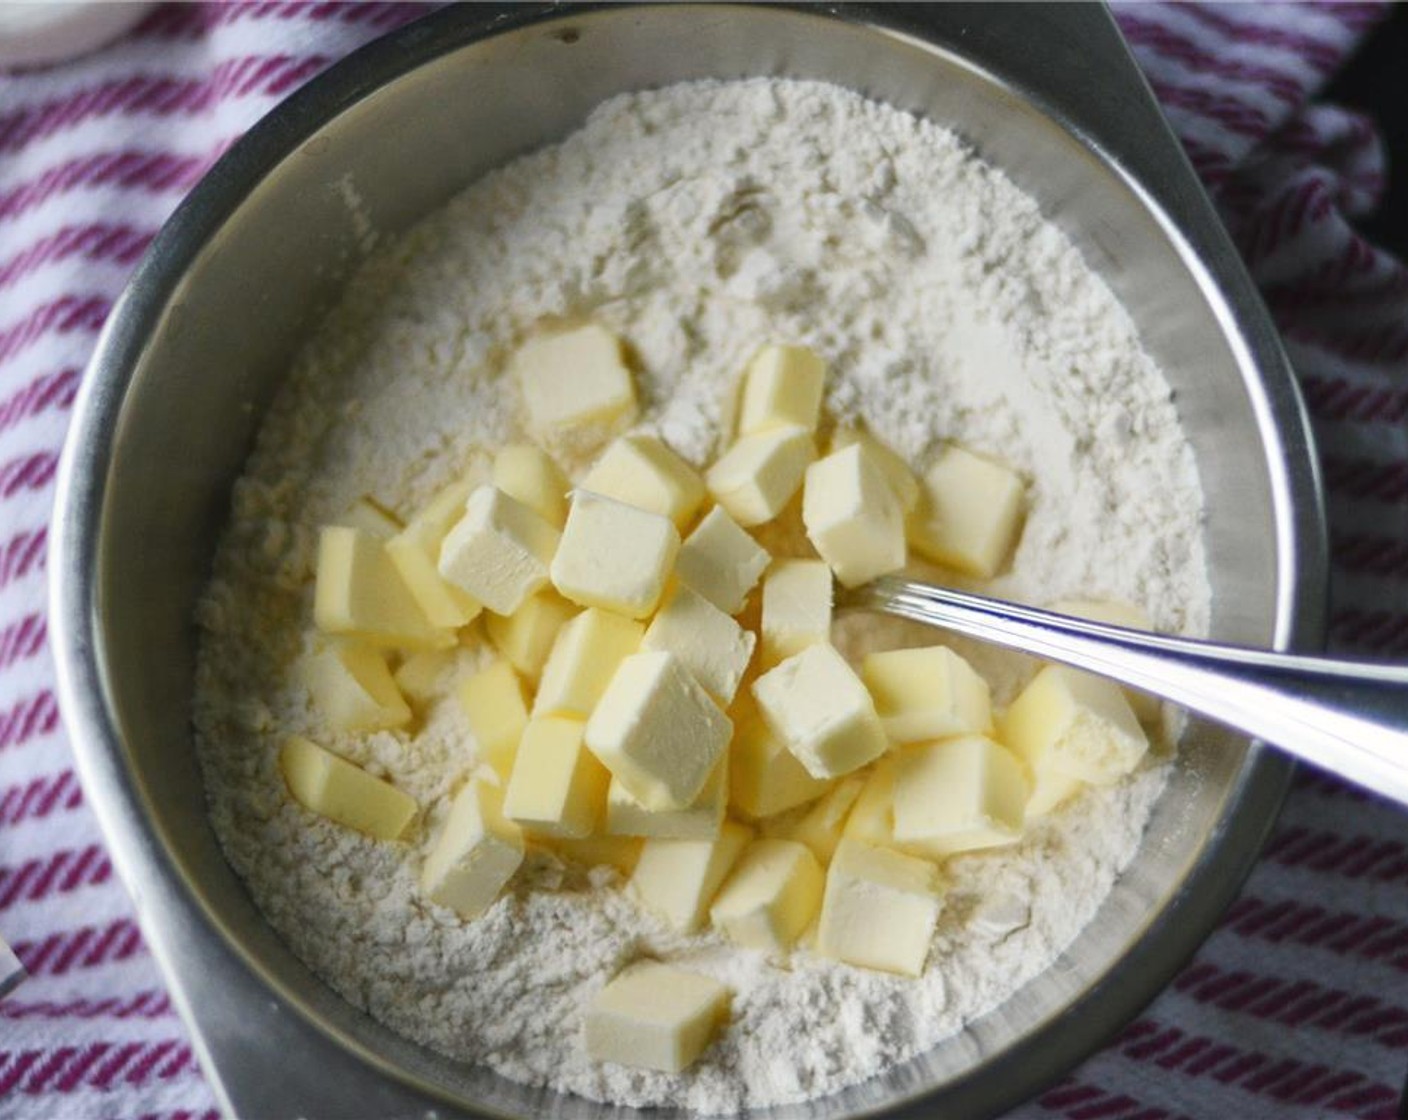 step 2 In a large bowl, whisk together All-Purpose Flour (1 1/2 cups), Granulated Sugar (1 tsp), and Salt (1/2 tsp). Add butter and toss to coat.